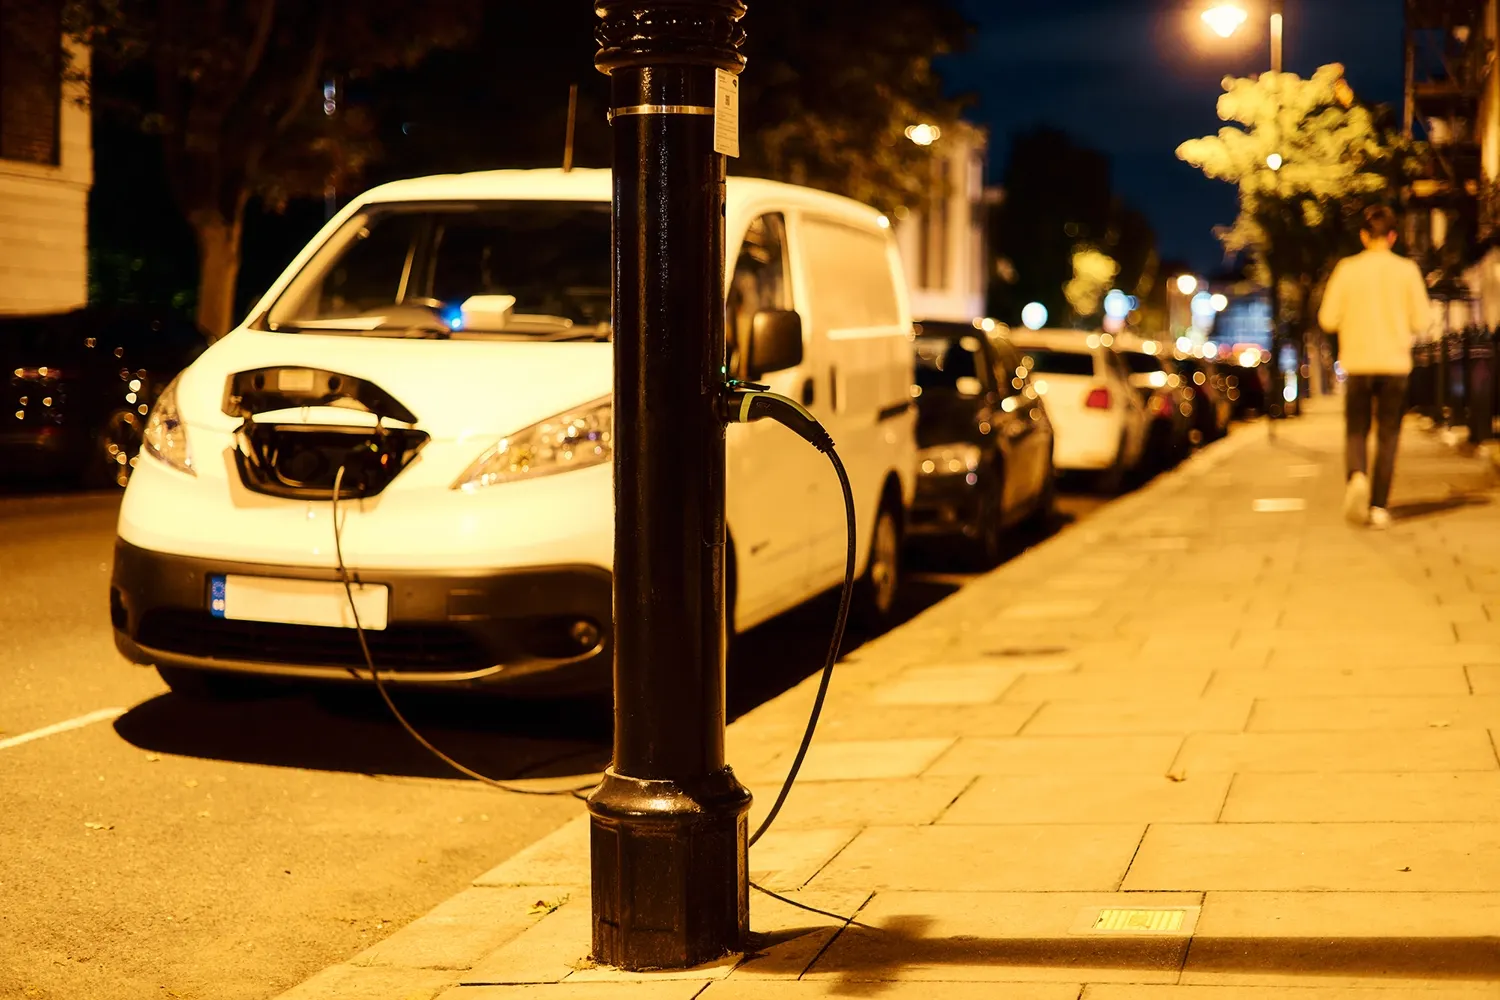 An EV van is charging overnight at an ubitricity street light charging station.